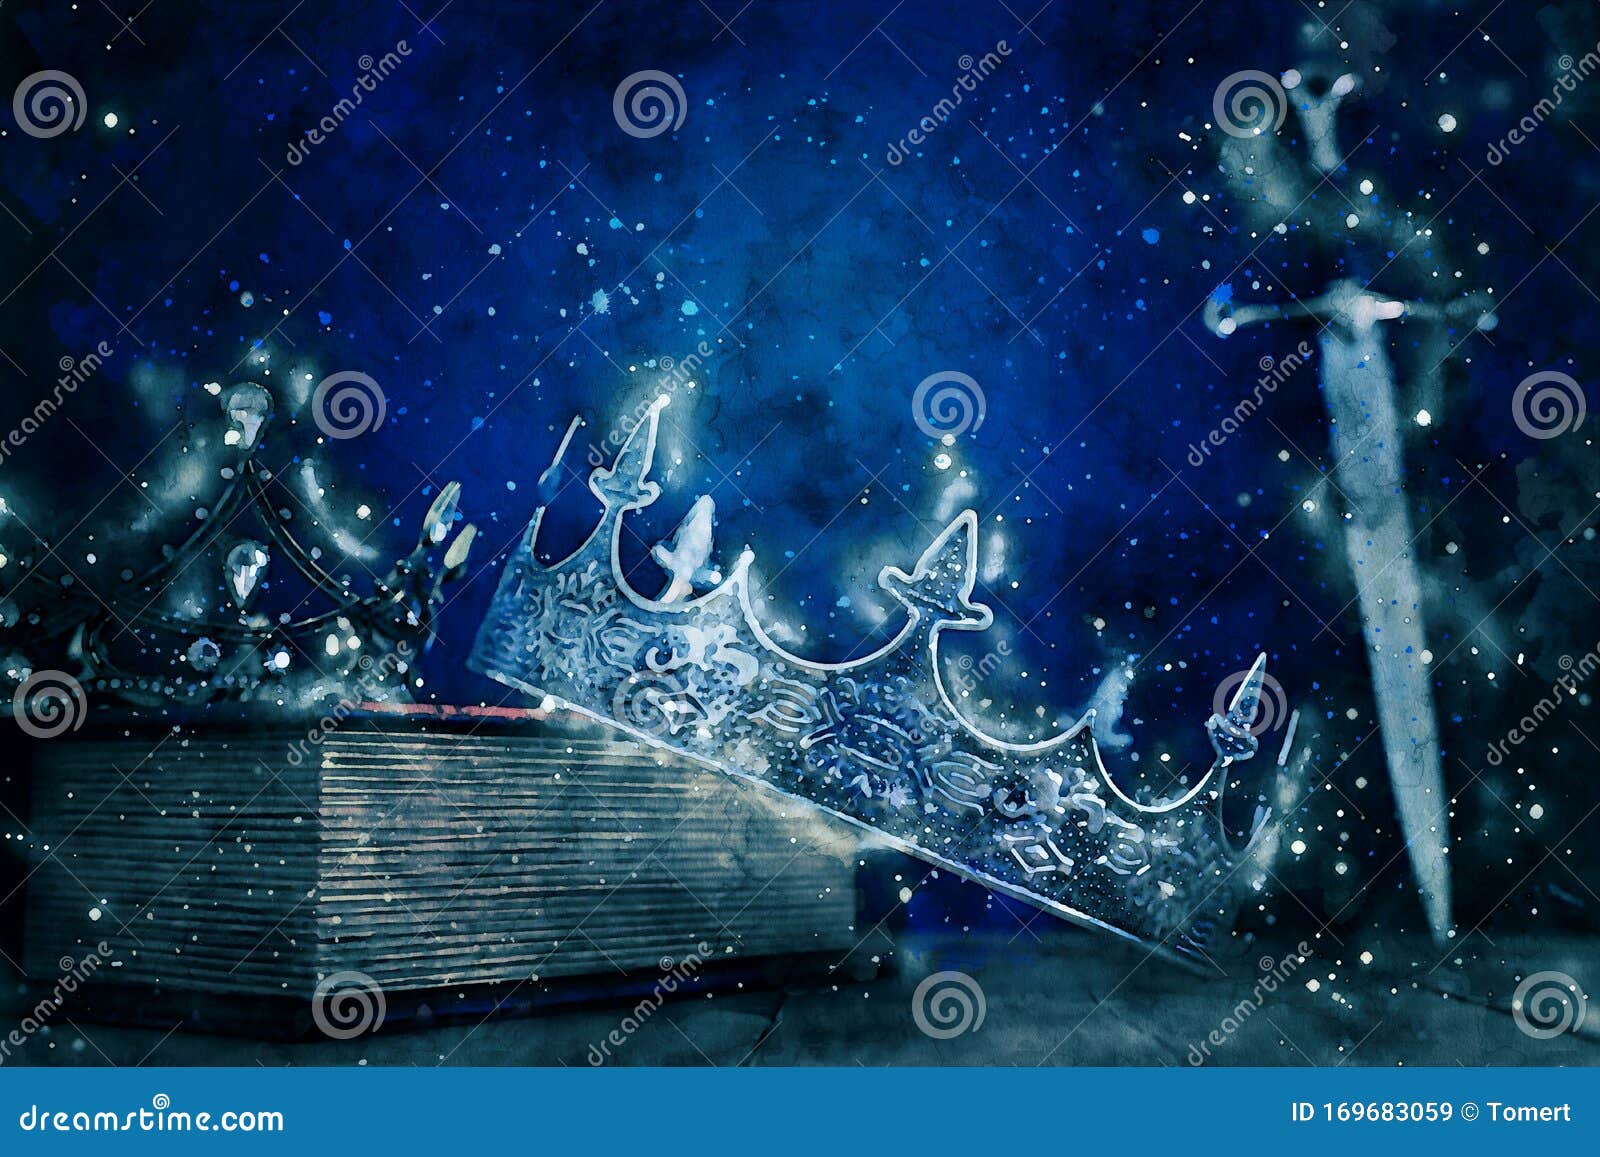 Watercolor Style And Abstract Image Of Beautiful Queen/king Crown